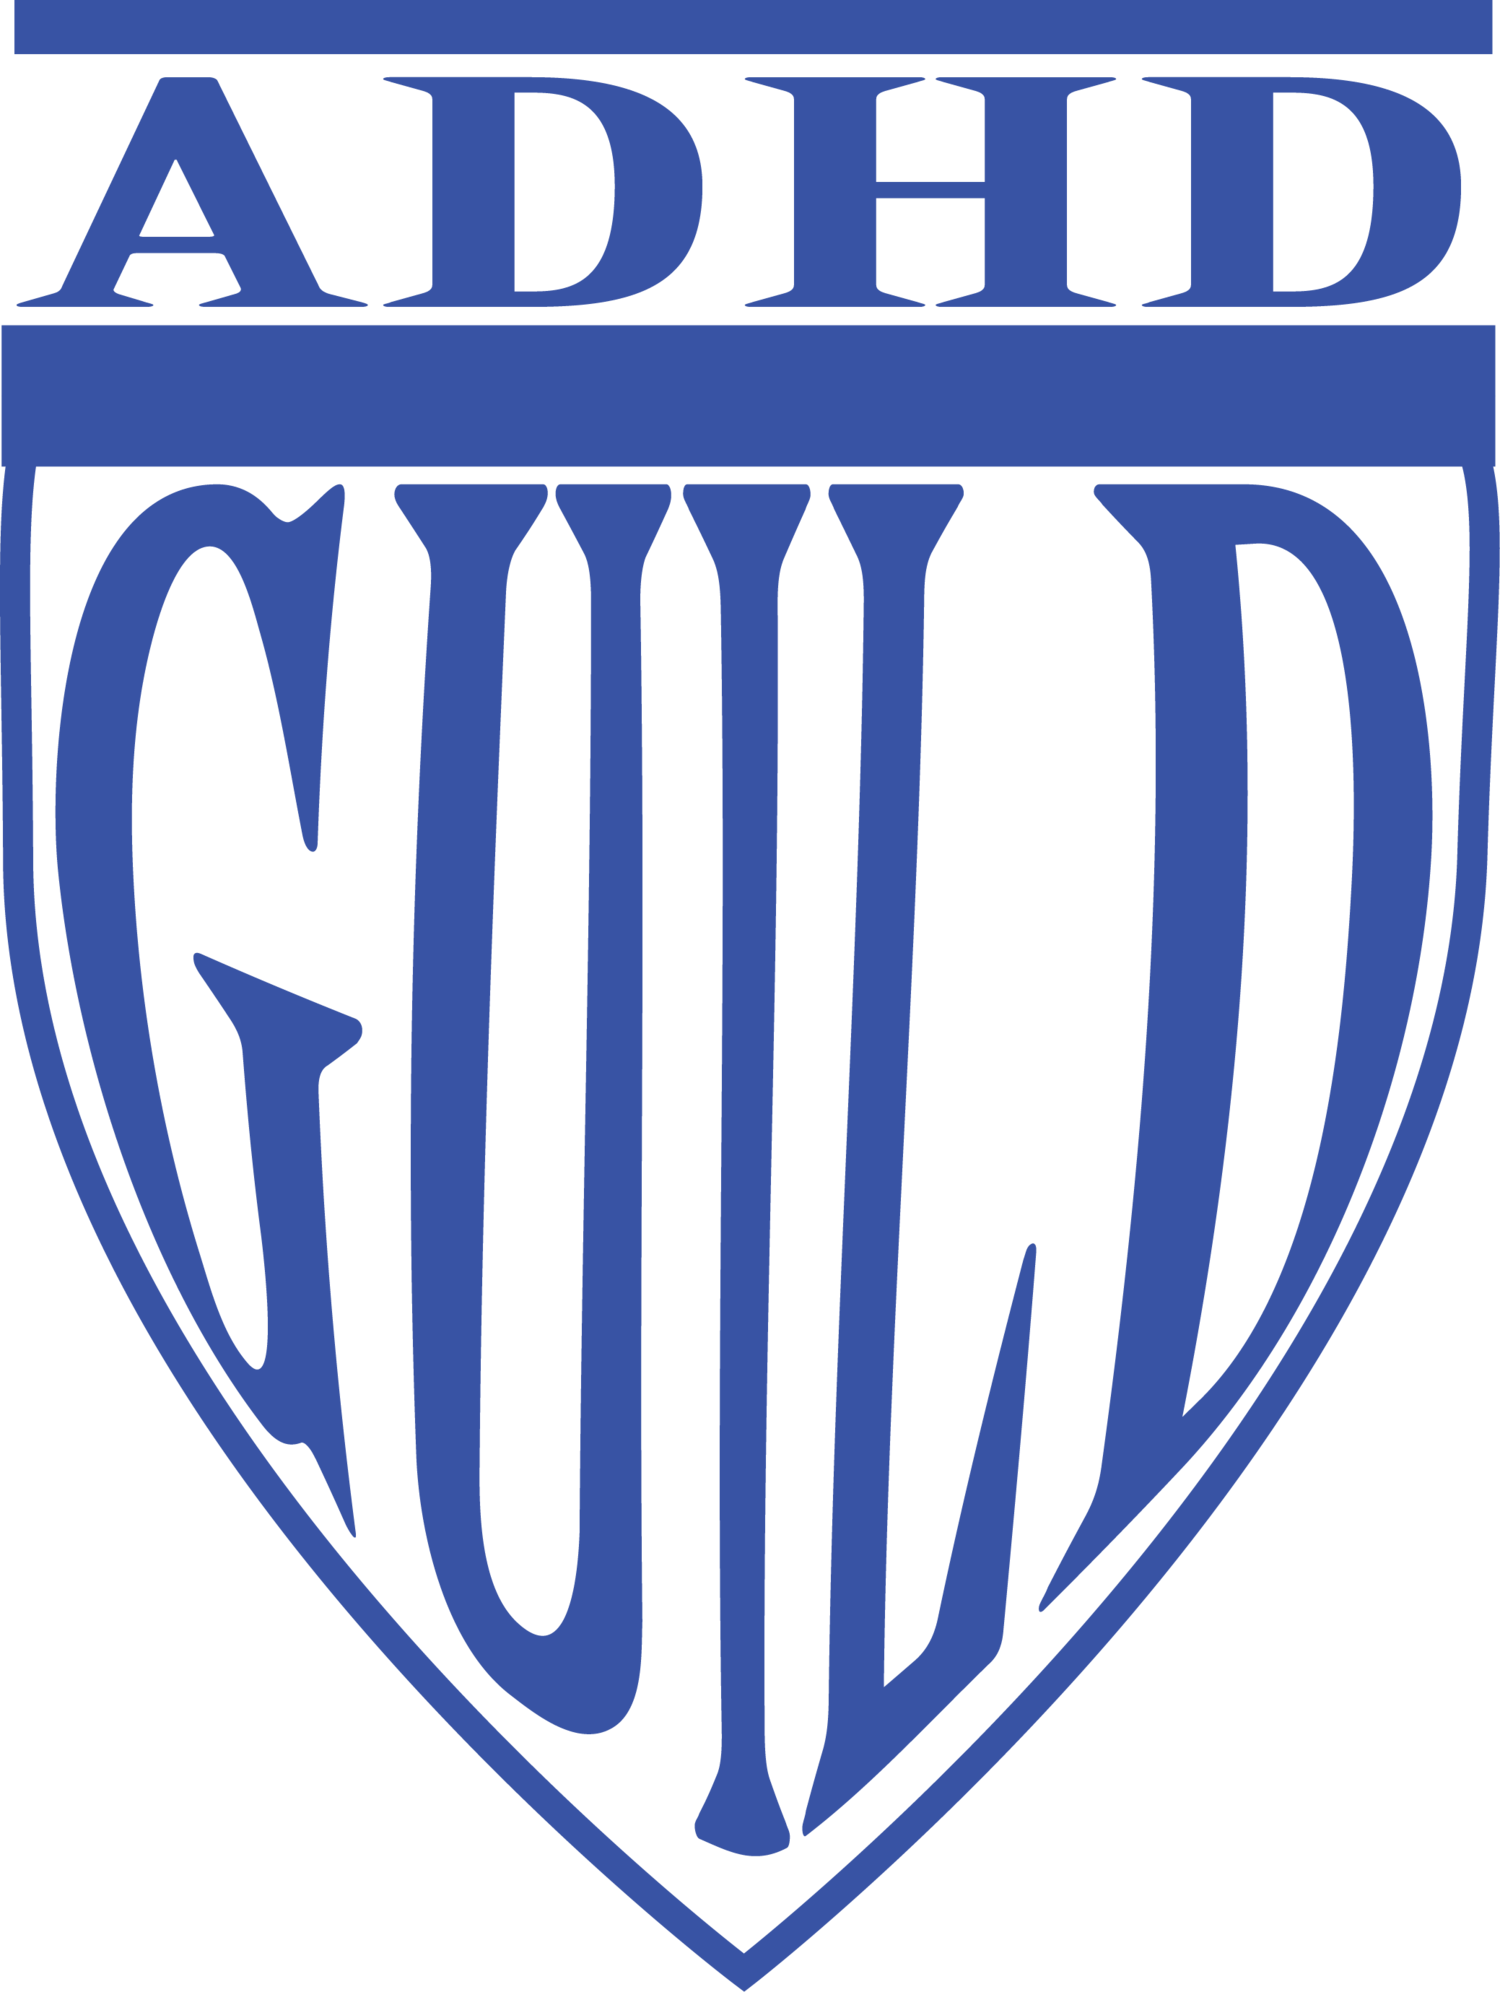 The ADHD Guild